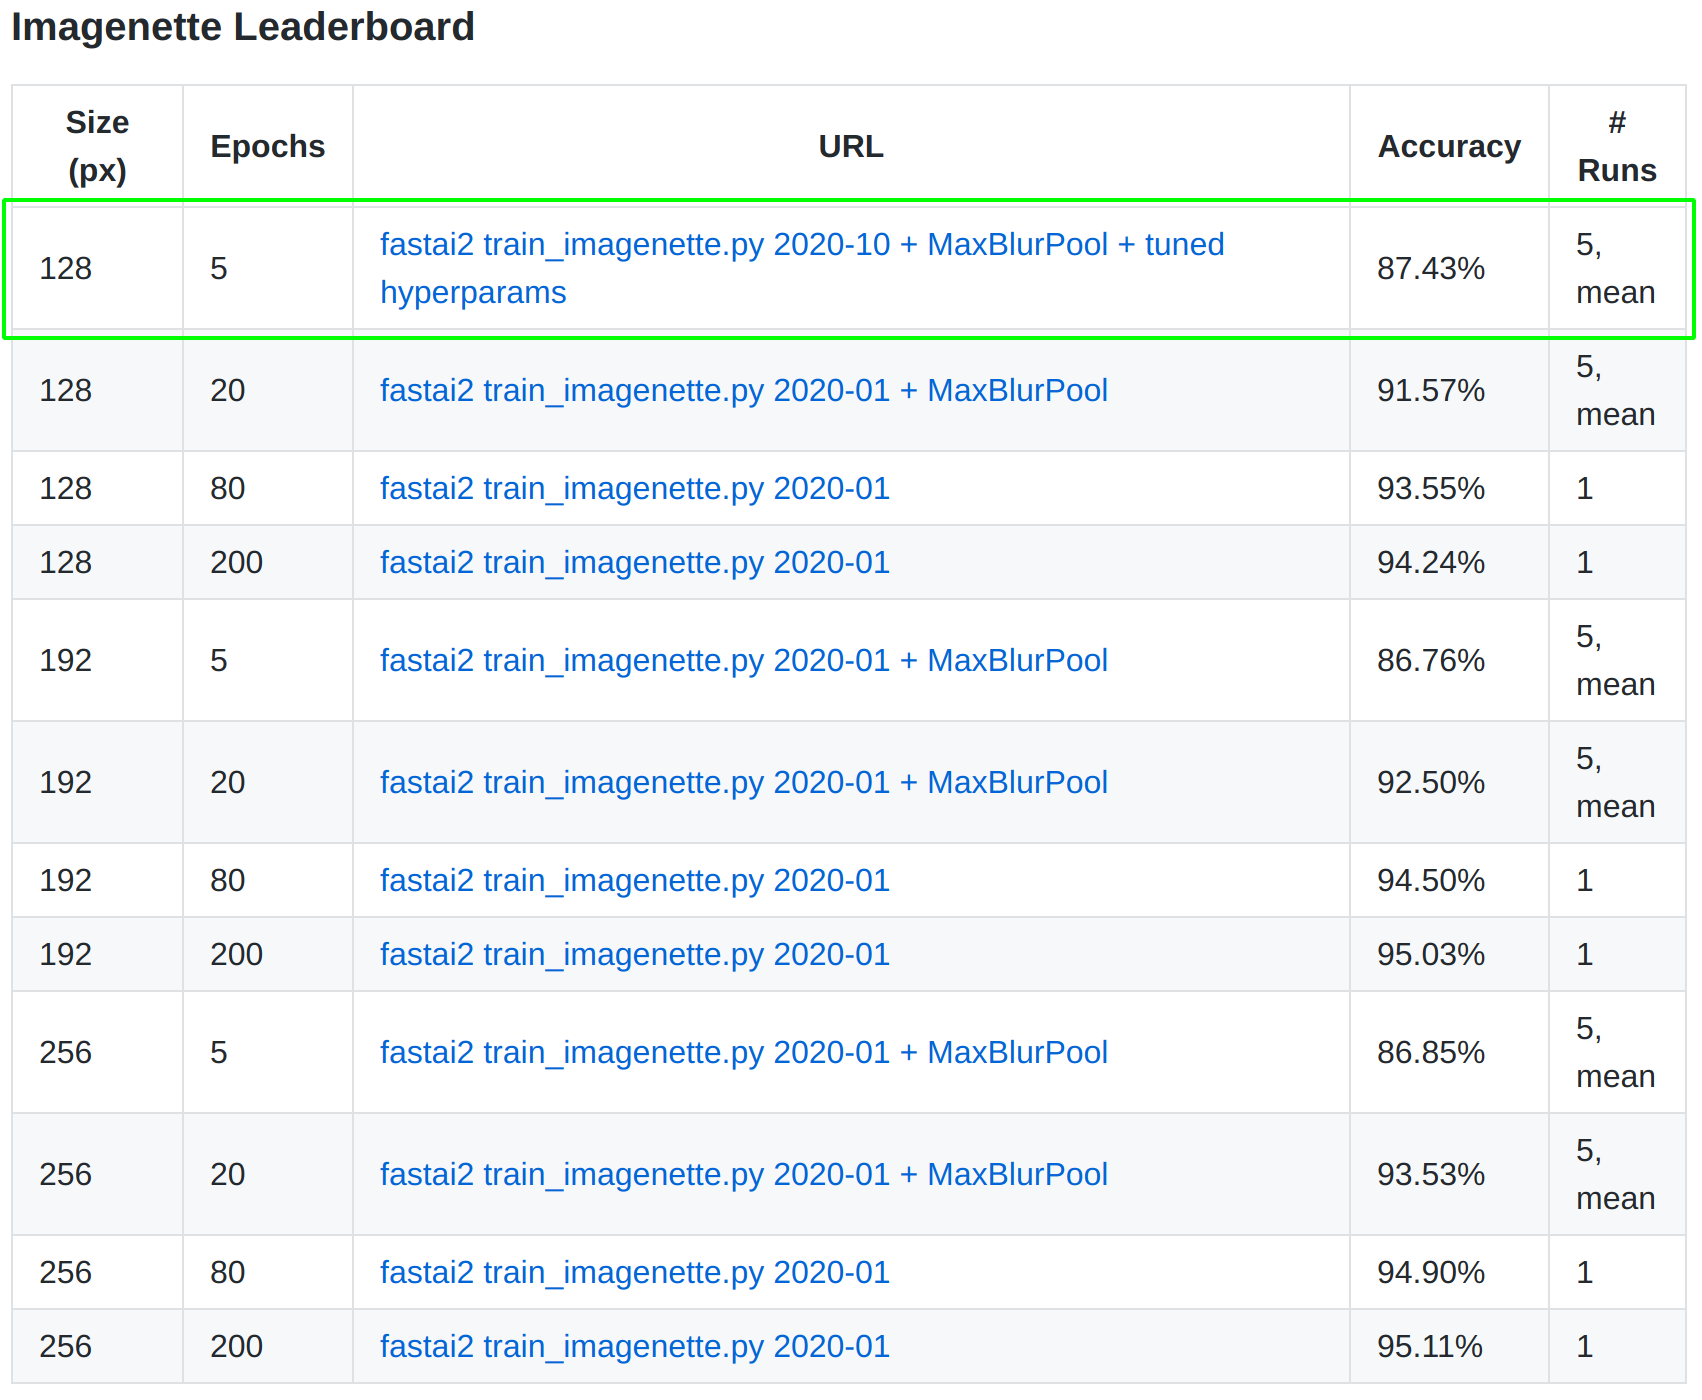 How to reach the top of the imagenette leaderboard?